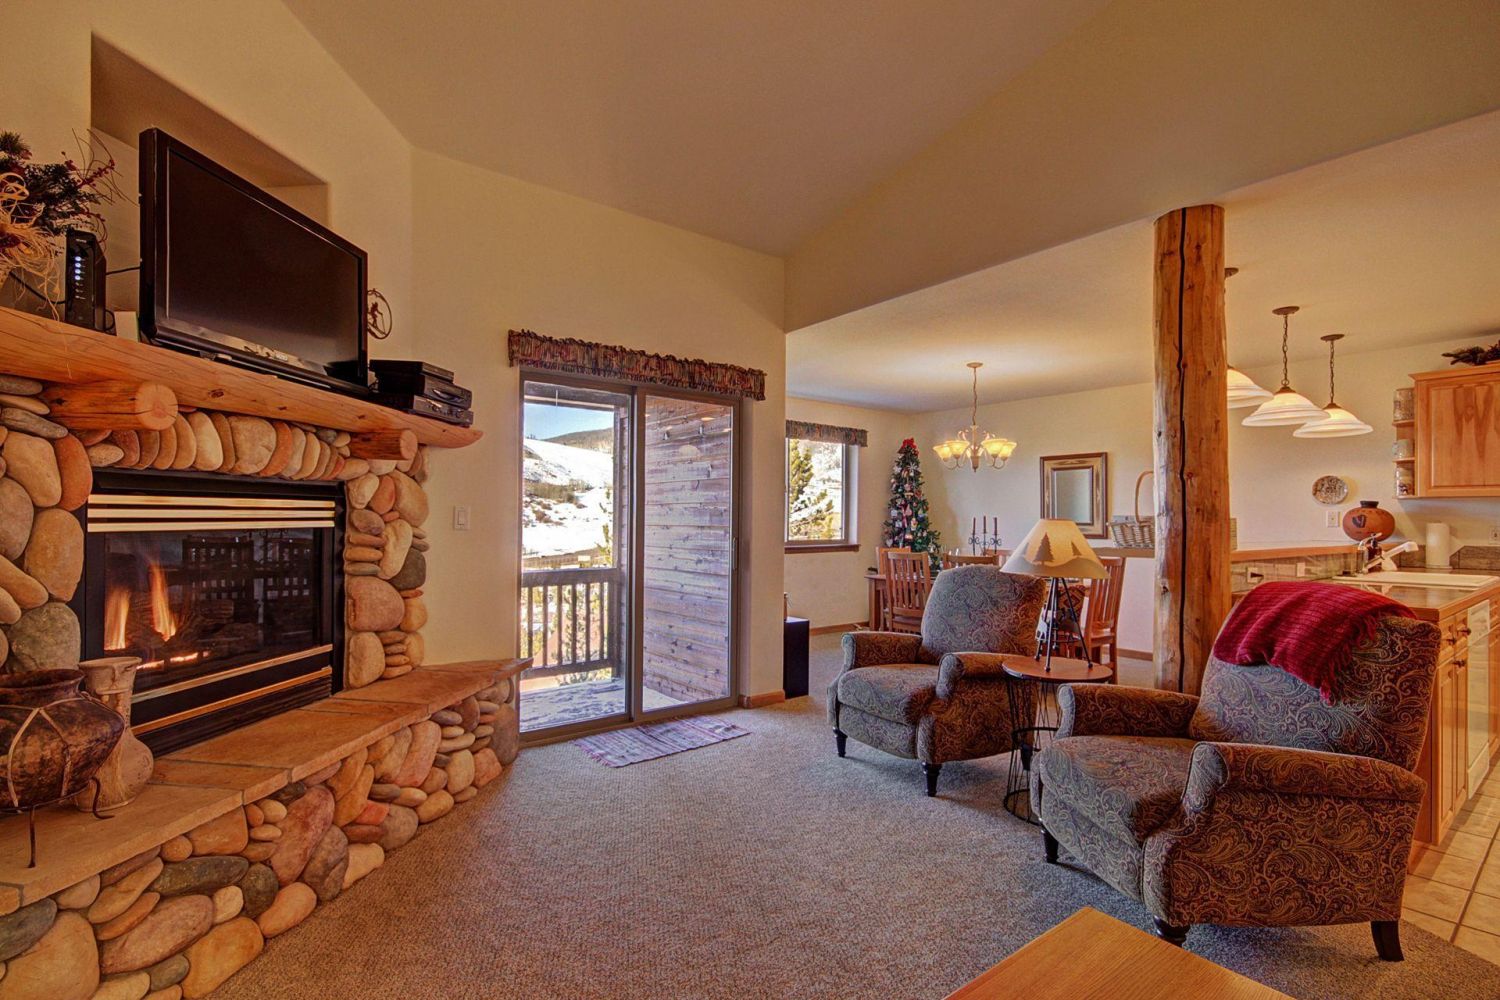 Beautiful Living Area - Features a stone fireplace and HD TV.